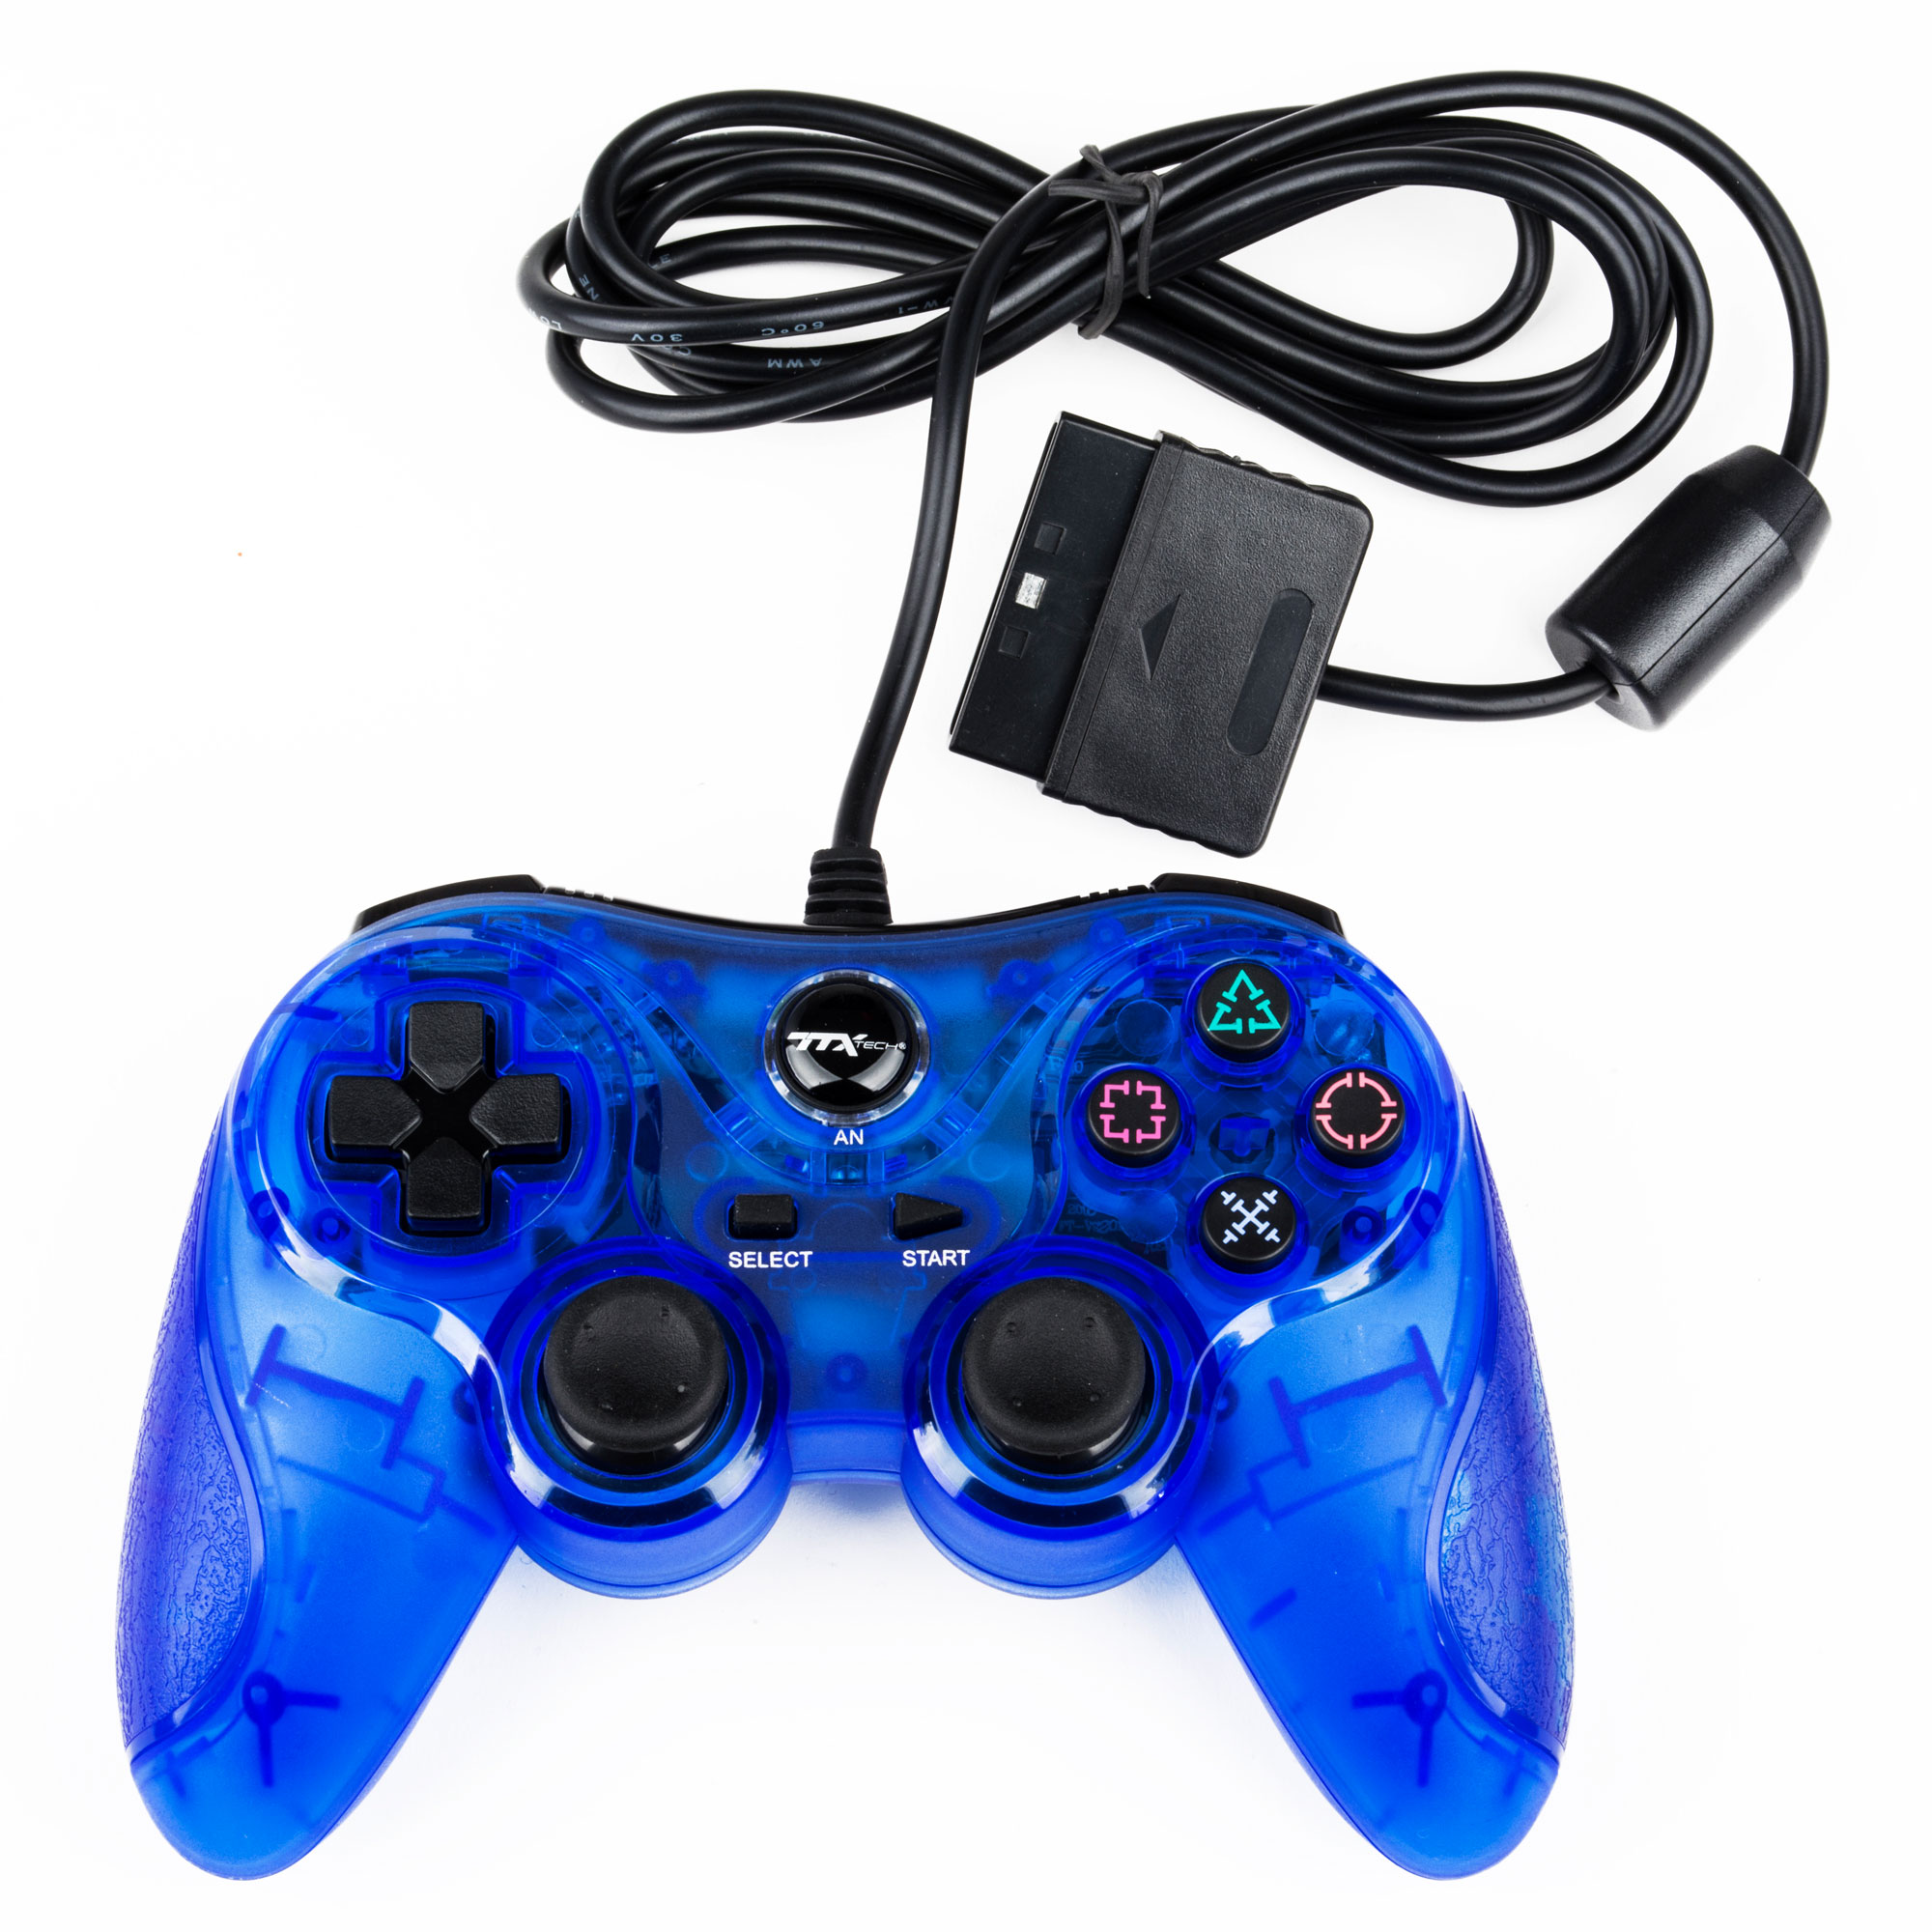 Джойстик дуал. Ps2 Controller. Wired ps2 Controller. Dualshock 2 ps2. PS/2 проводной.